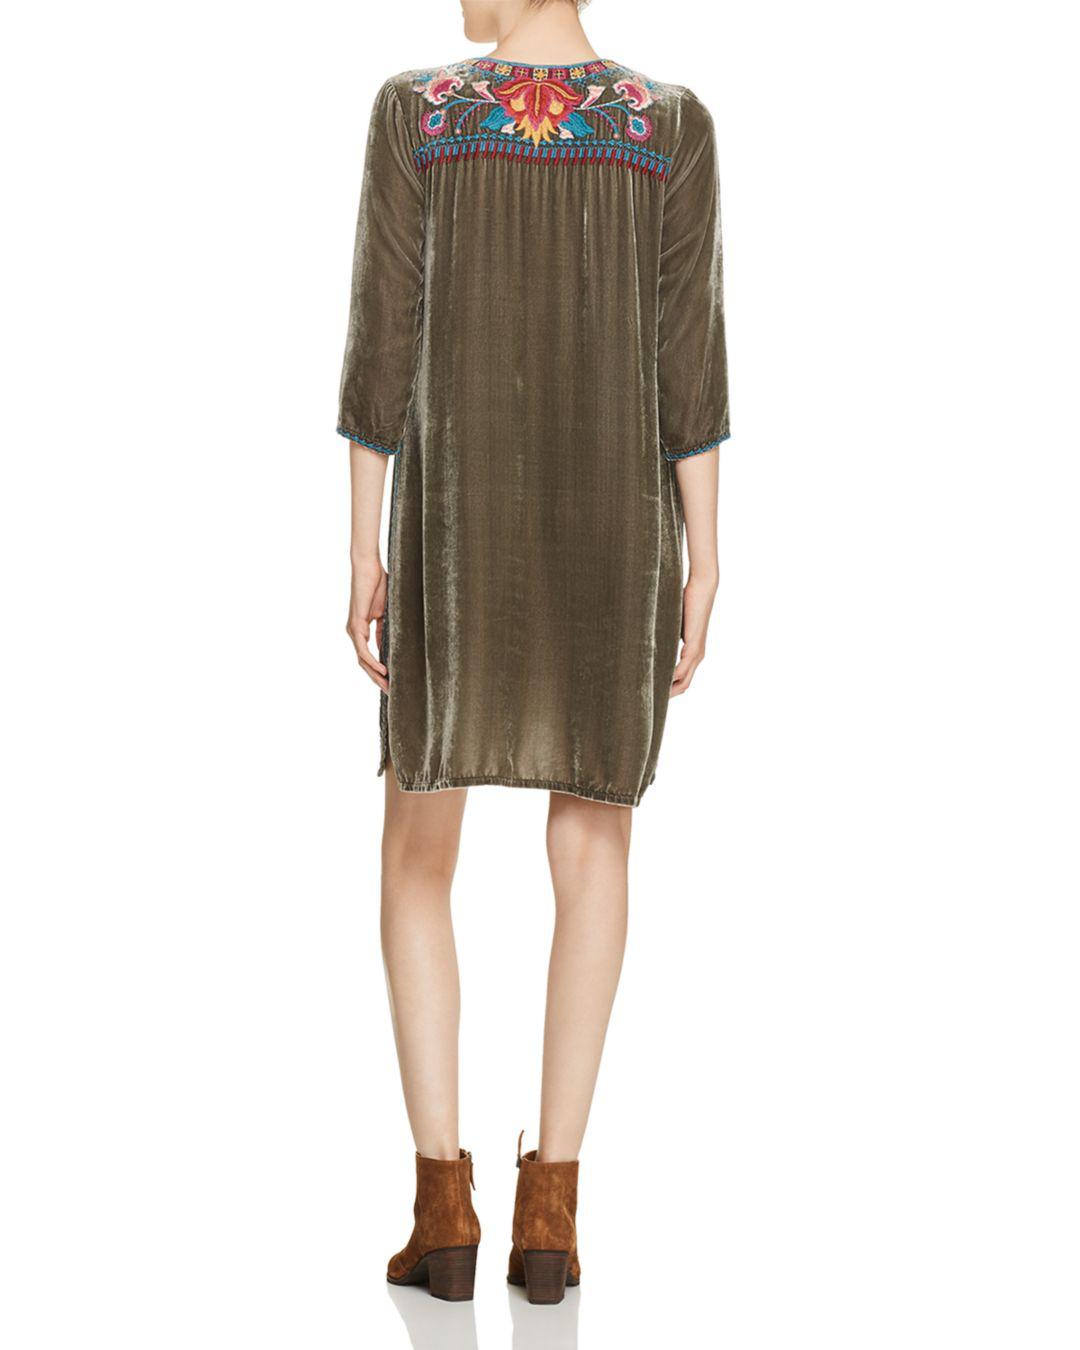 Johnny Was Quito Embroidered Velvet Dress in Green - Lyst